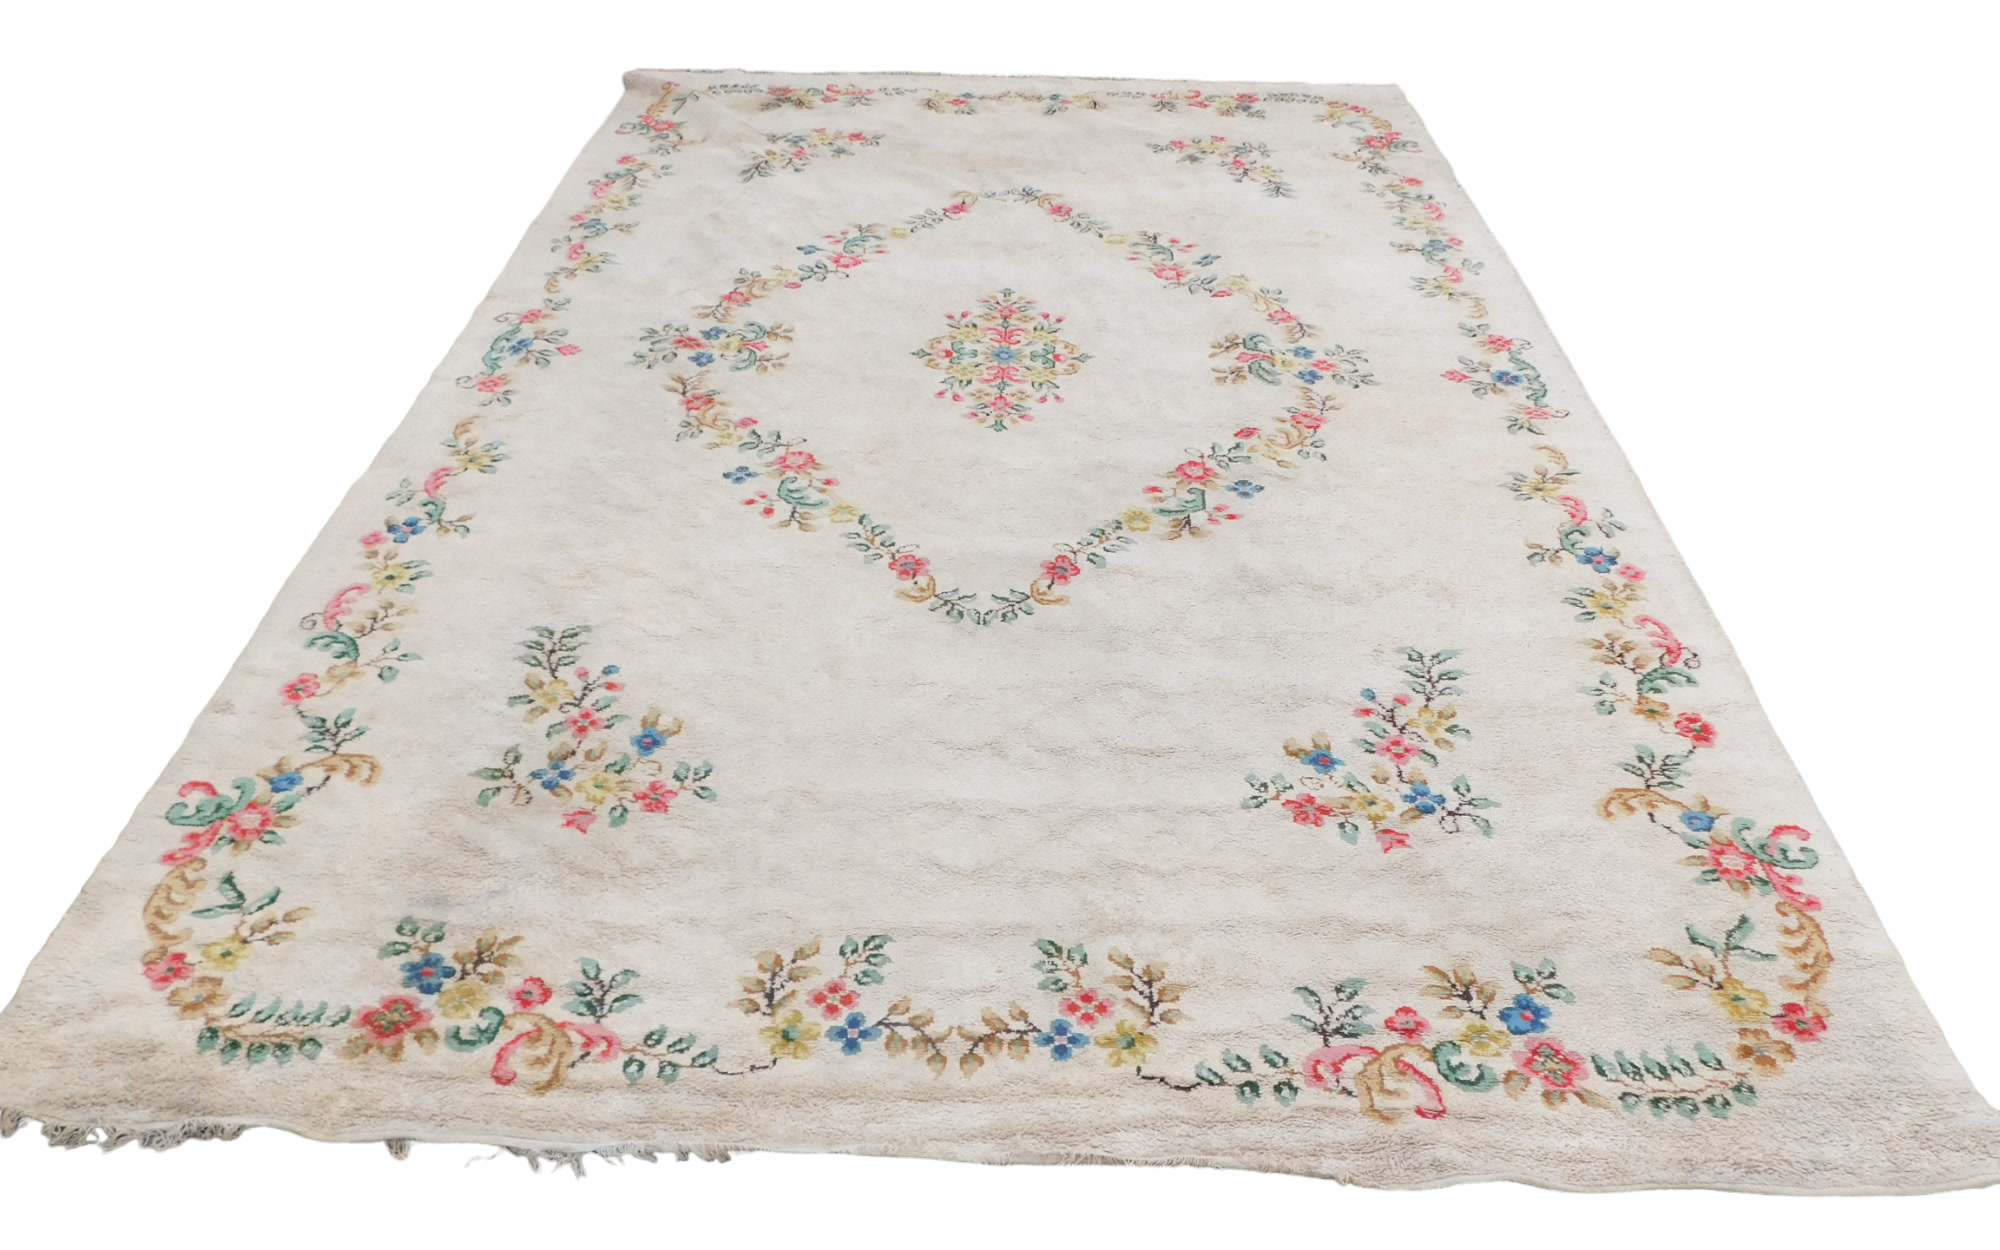 An Indian carpet, with a design of flowers on a cream ground, 540 x 361cm.